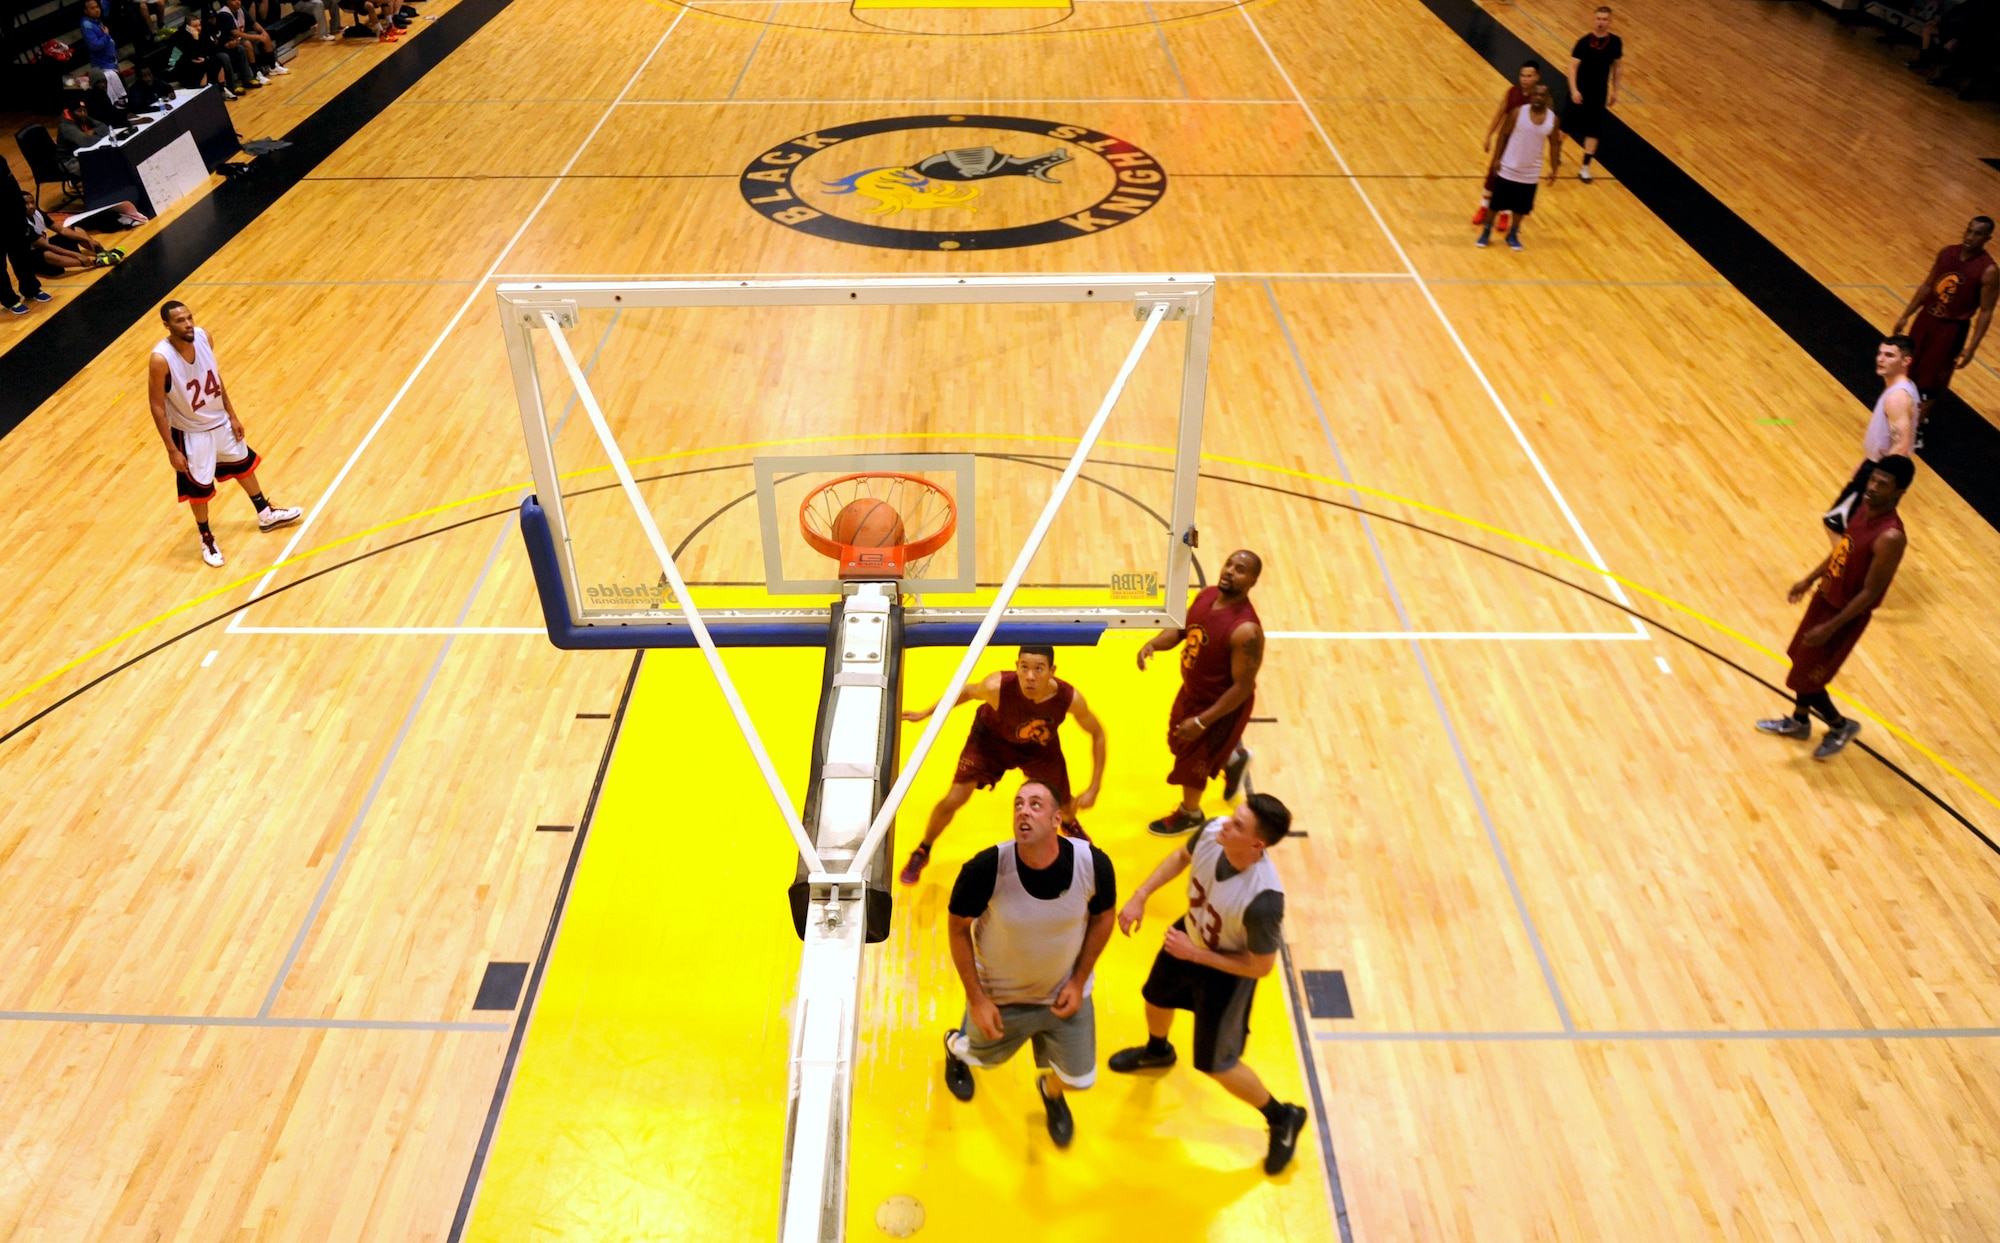 The 19th Logistics Readiness Squadron Team 1 and the 19th Medical Group Team 1 play in the pre- season intramural basketball game Jan. 5, 2015, at Little Rock Air Force Base, Ark. The 19th MDG Team 1 won the game 58-42. (U.S. Air Force photo by Senior Airman Stephanie Serrano)